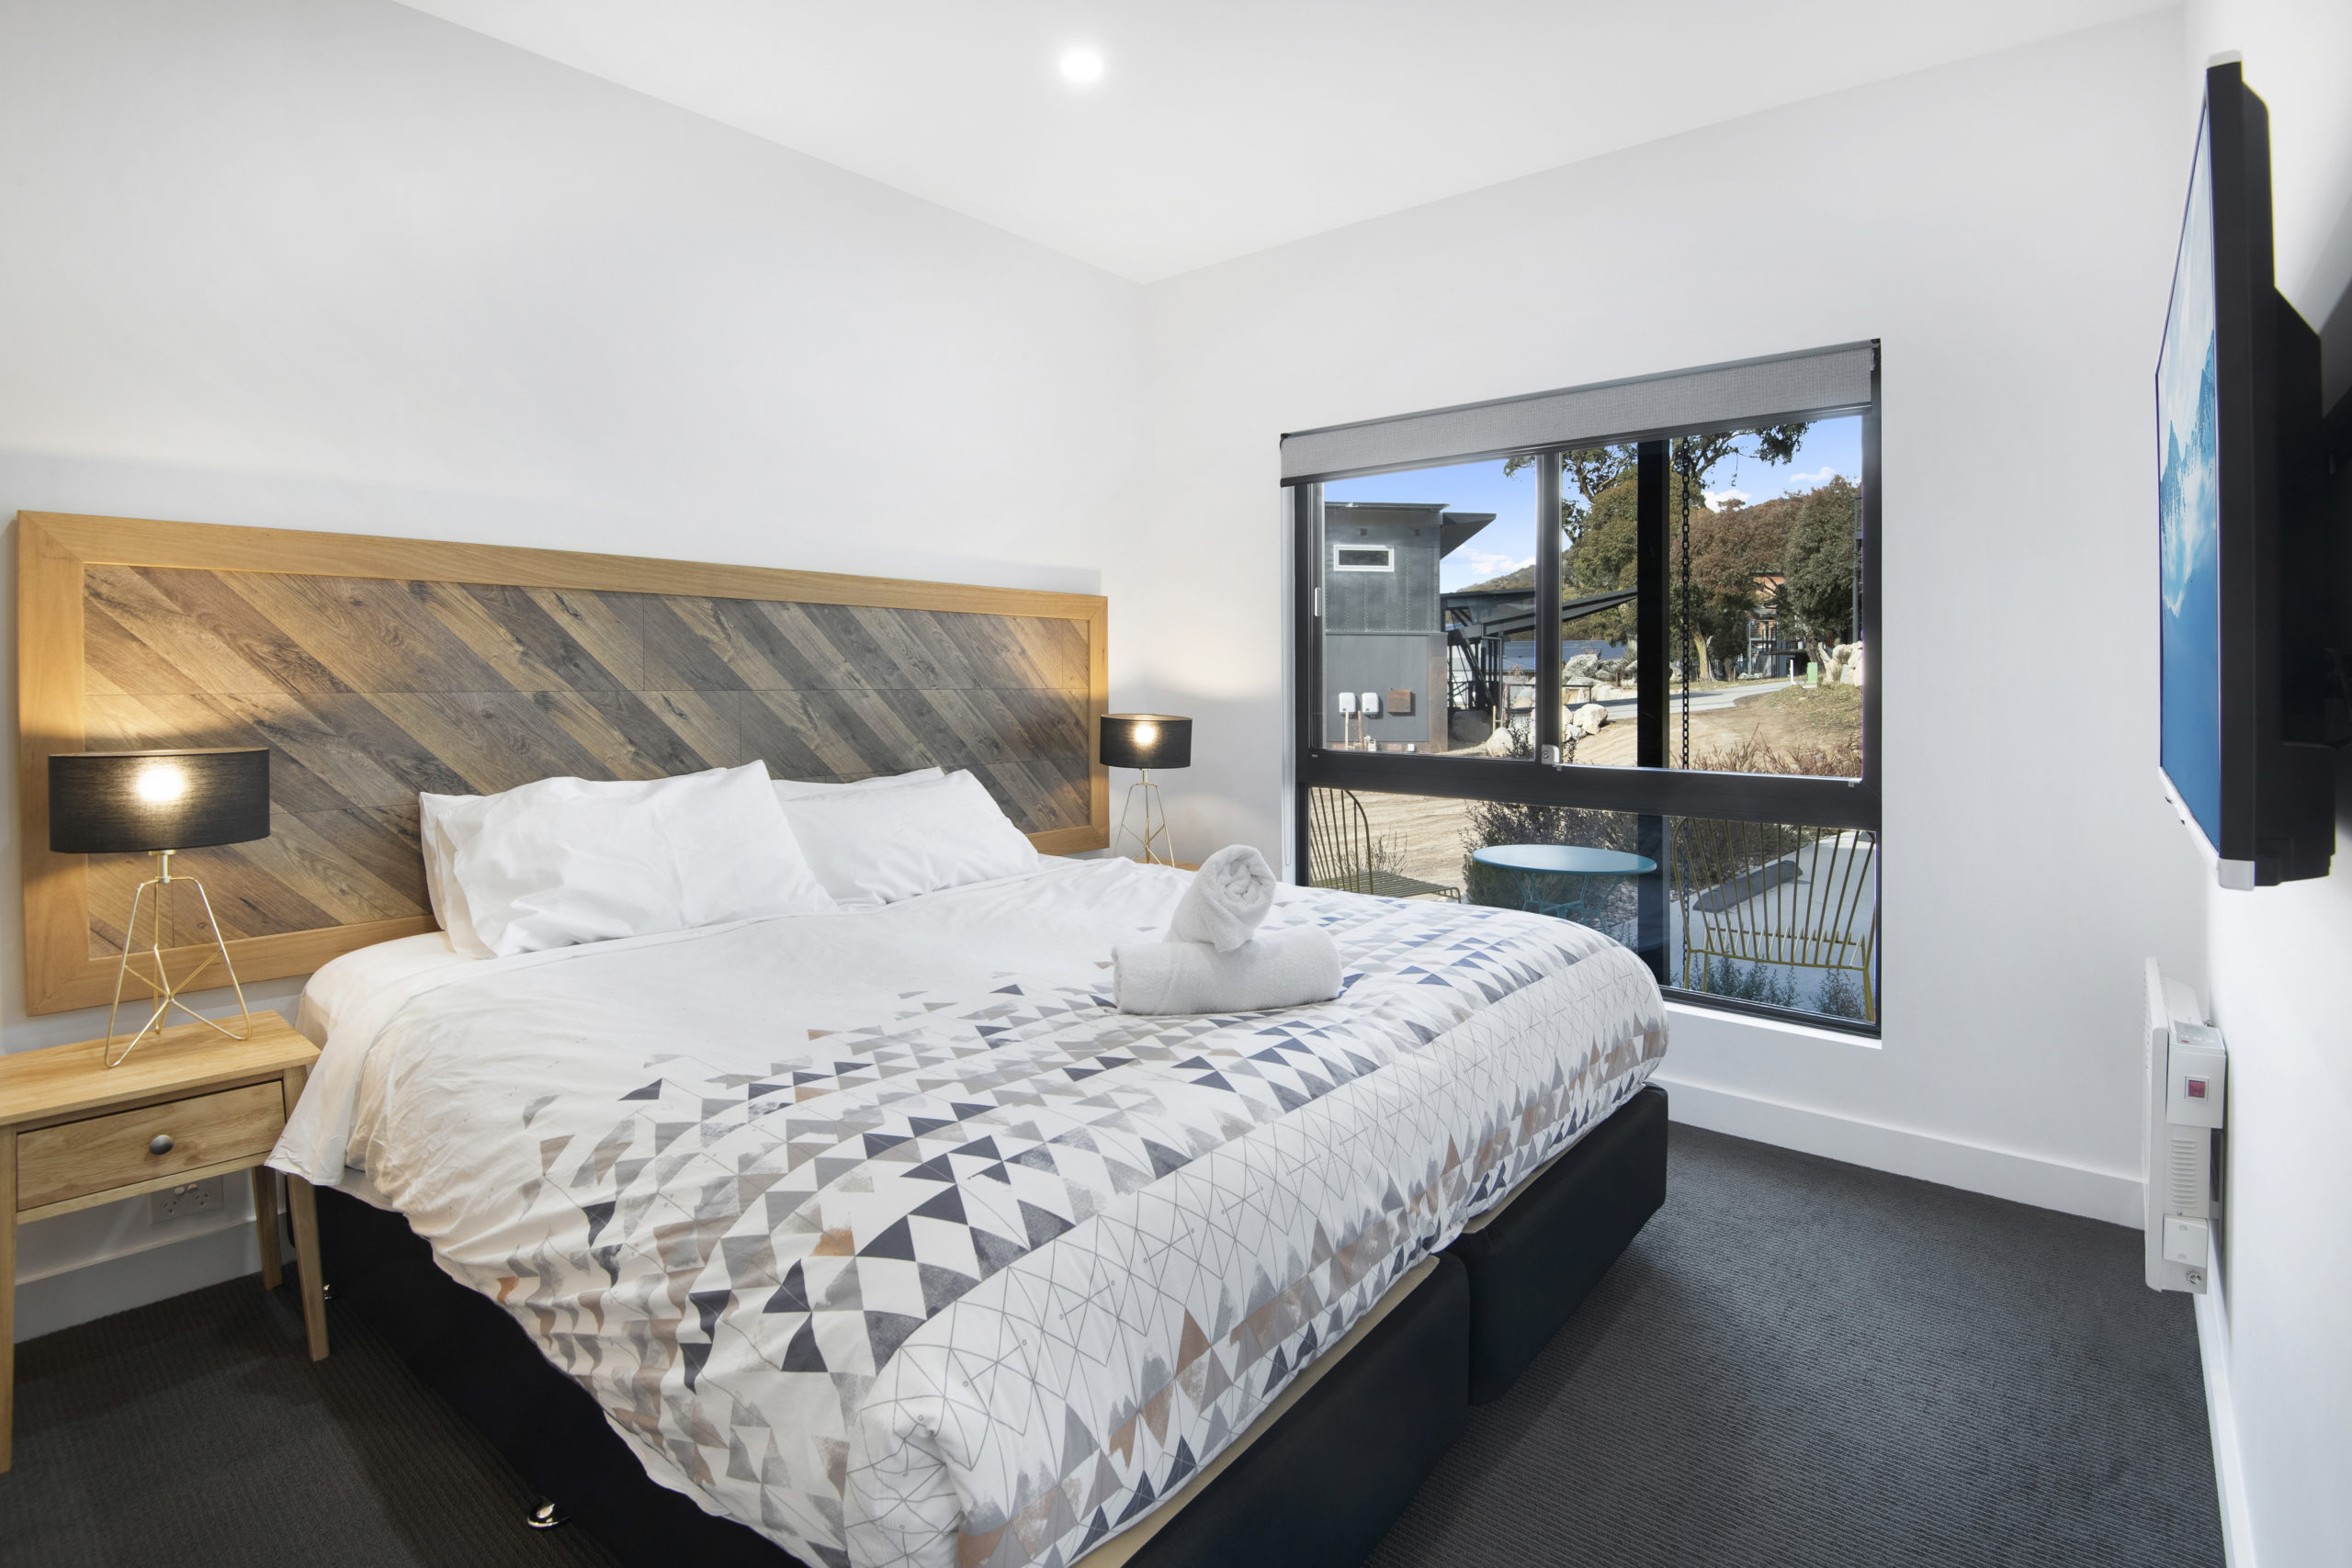 Luxurious One Bedroom Sun Drenched Chalet at Lake Crackenback with Picturesque Lake and Mountain Views – Price: Offers Invited Over $800,000